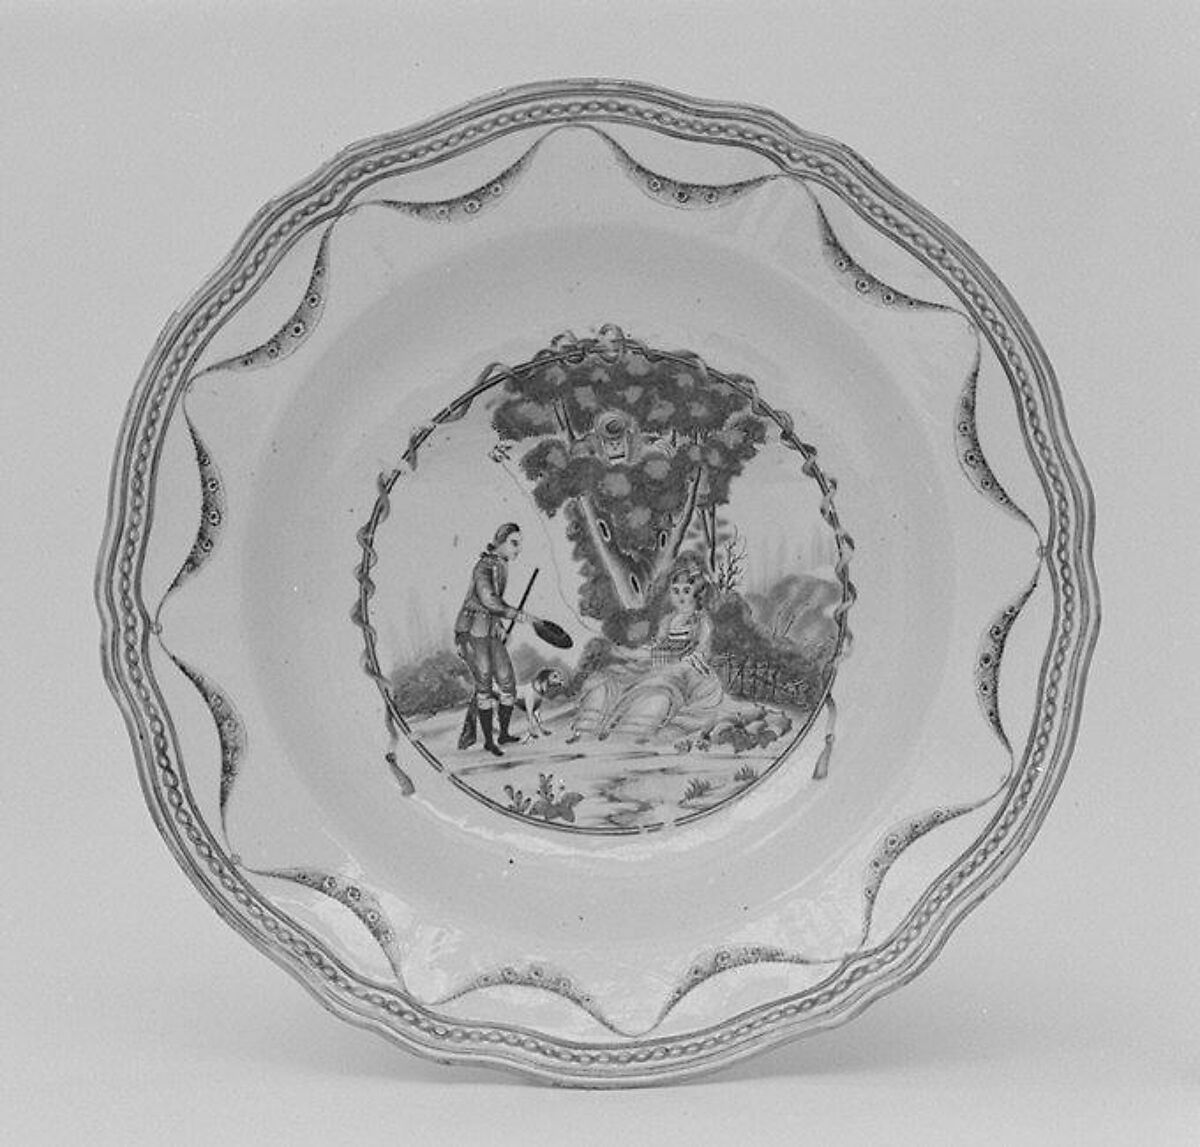 Soup plate (part of a service), Hard-paste porcelain, Chinese, for Continental European market 